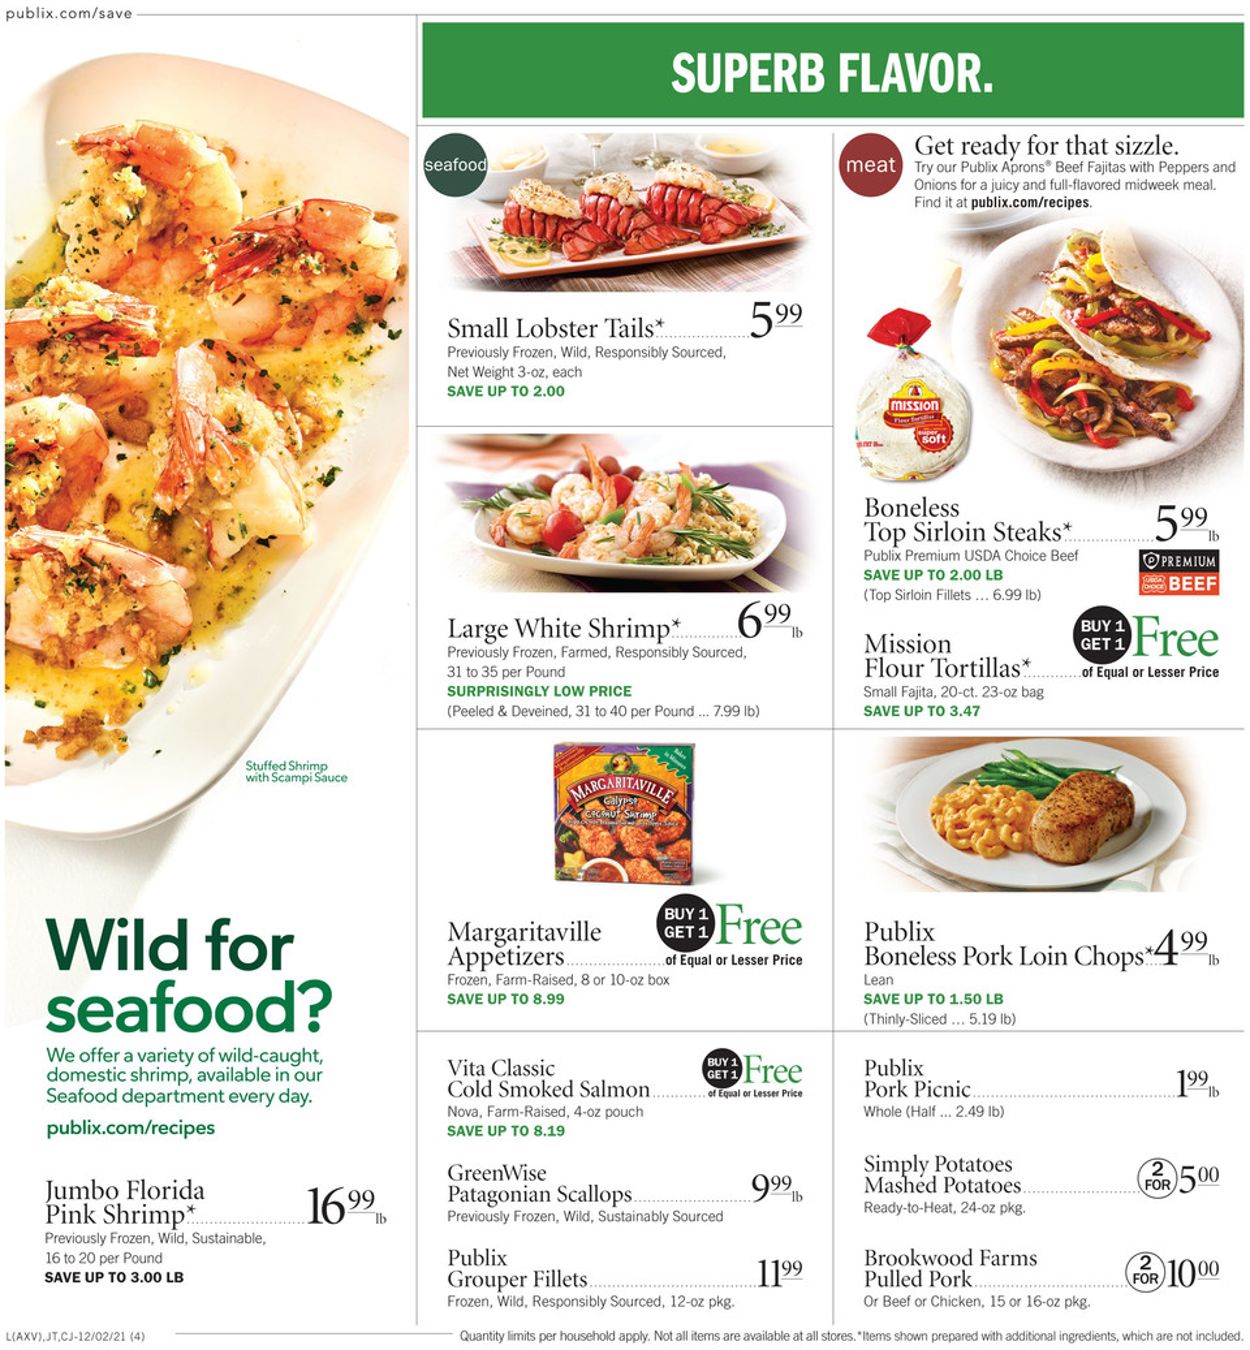 Publix HOLIDAY 2021 Current weekly ad 12/02 12/08/2021 [4] frequent